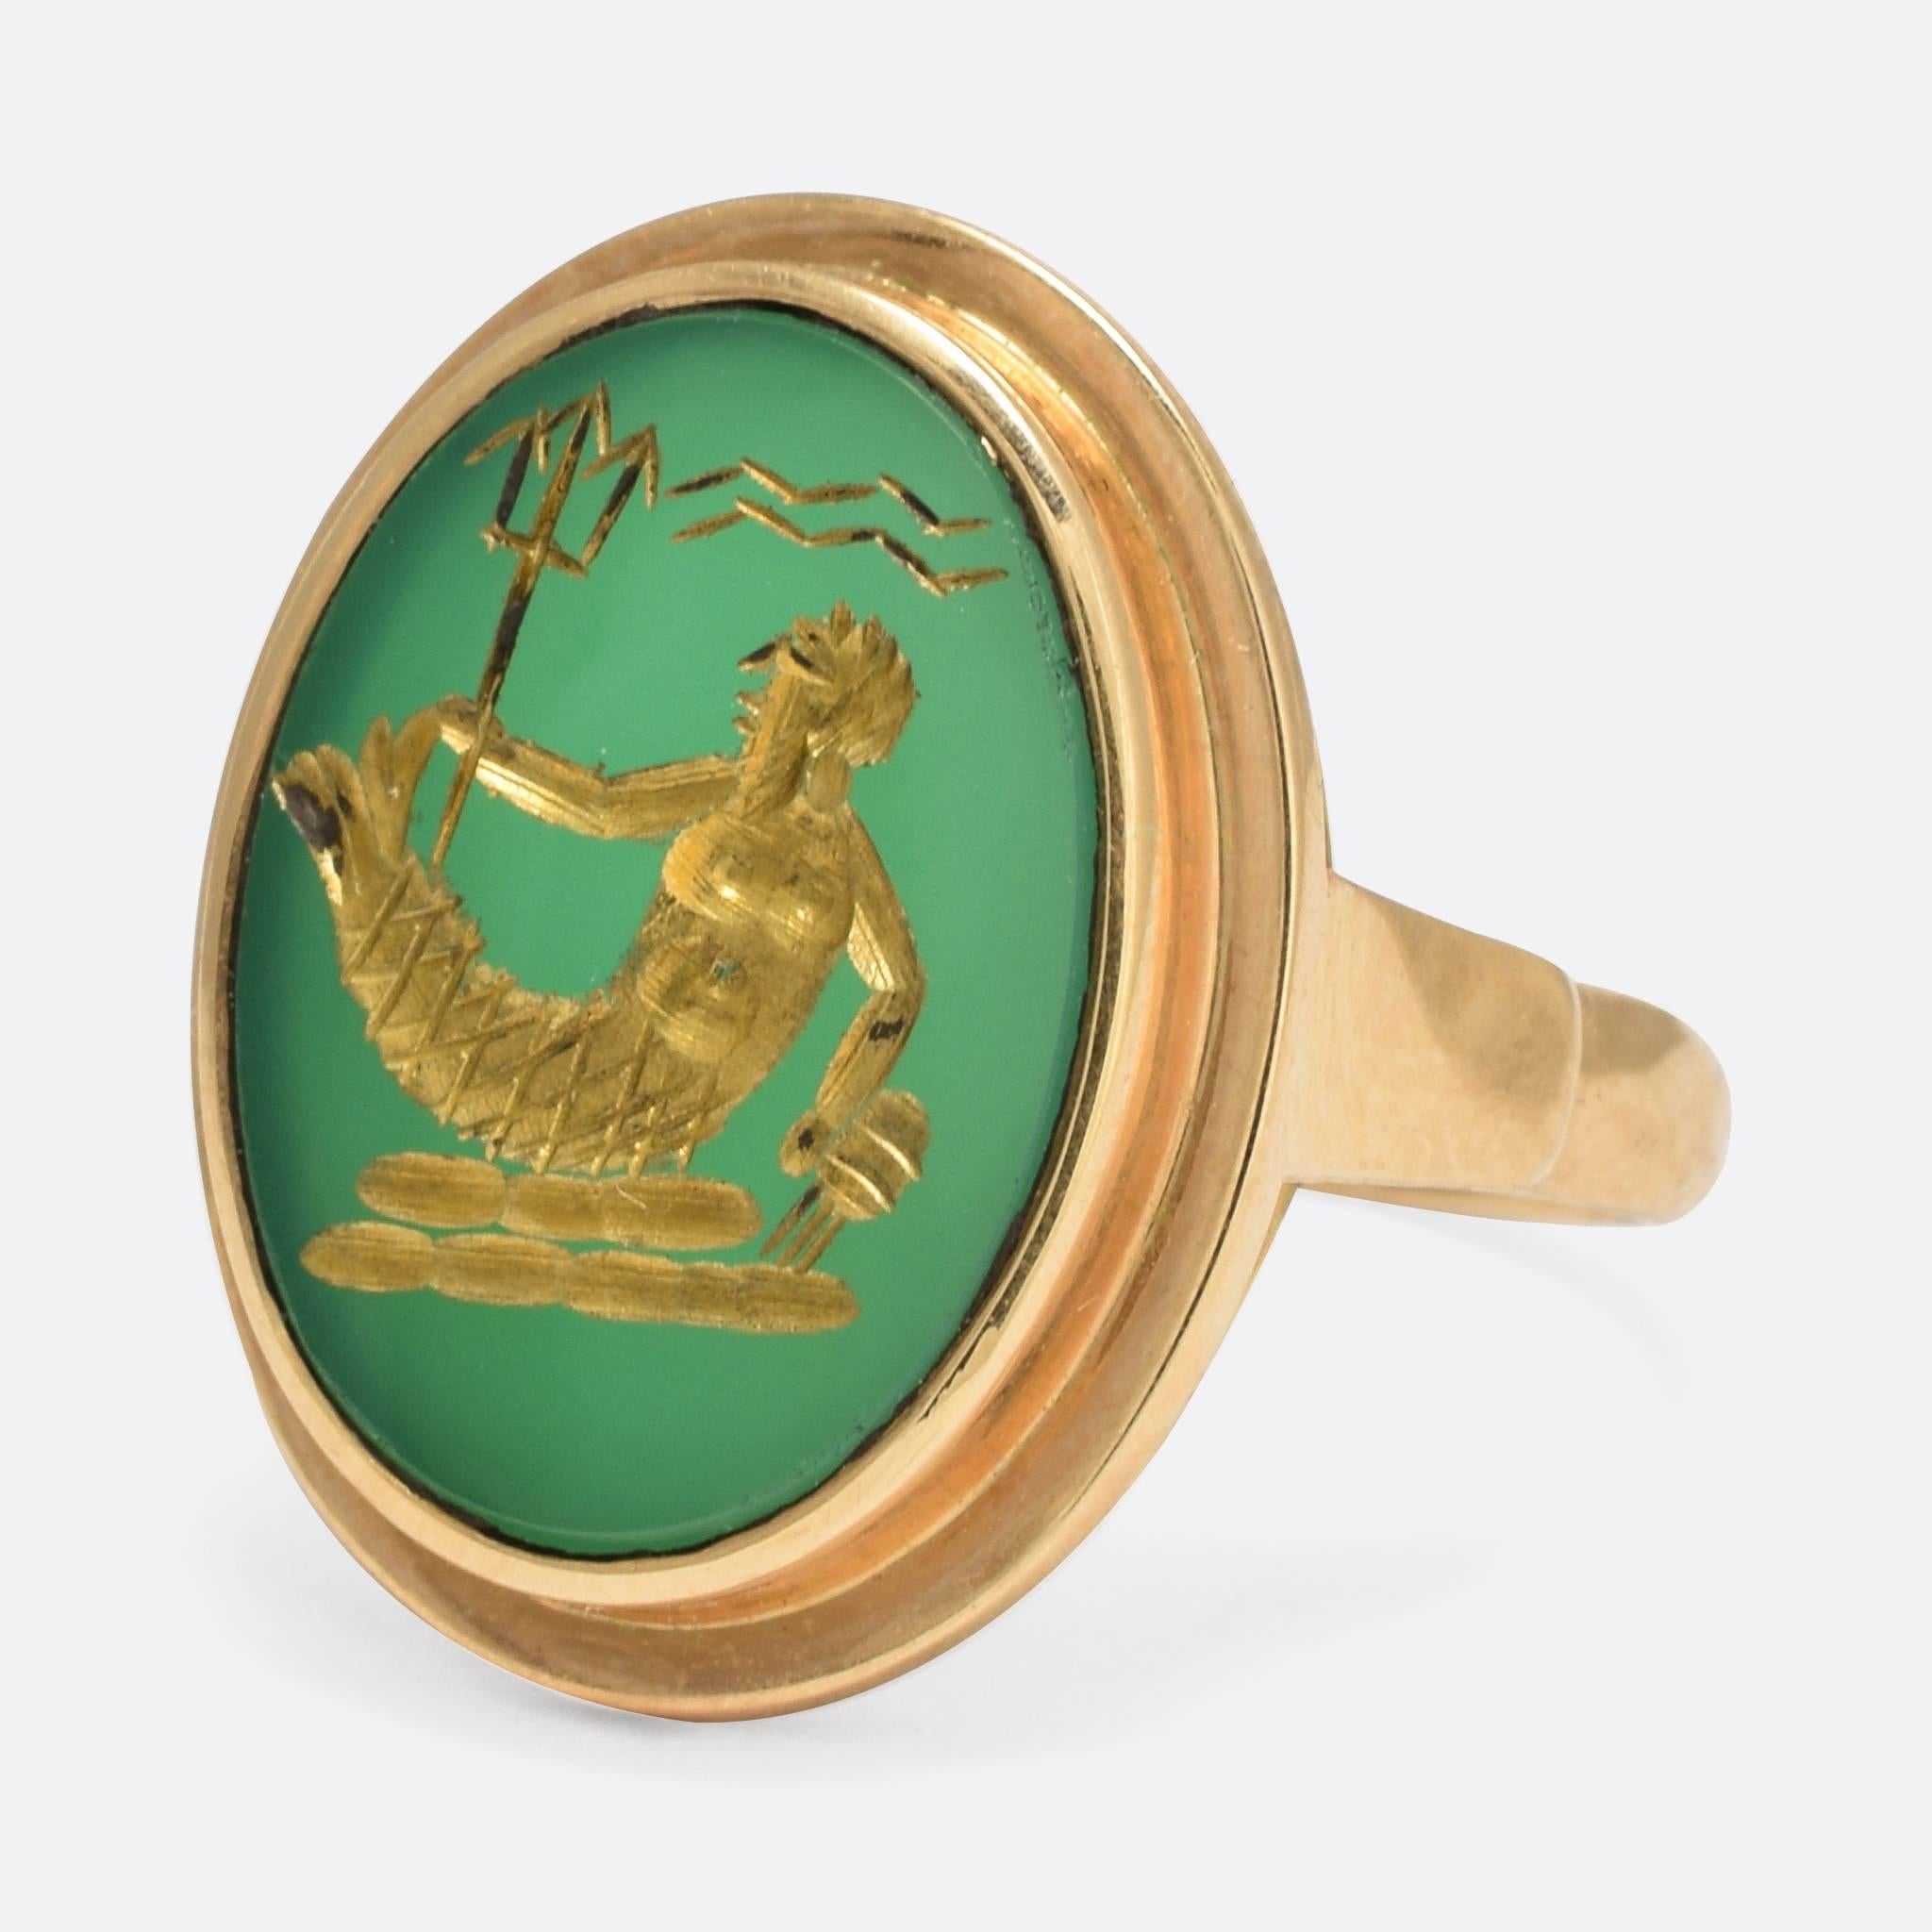 This cool intaglio ring depicts the ancient deity Poseidon (or Neptune if you're Roman). He has been modelled in the ancient style, with trident in hand, although this ring is no where near that old and, somewhat unusually, the intaglio has been